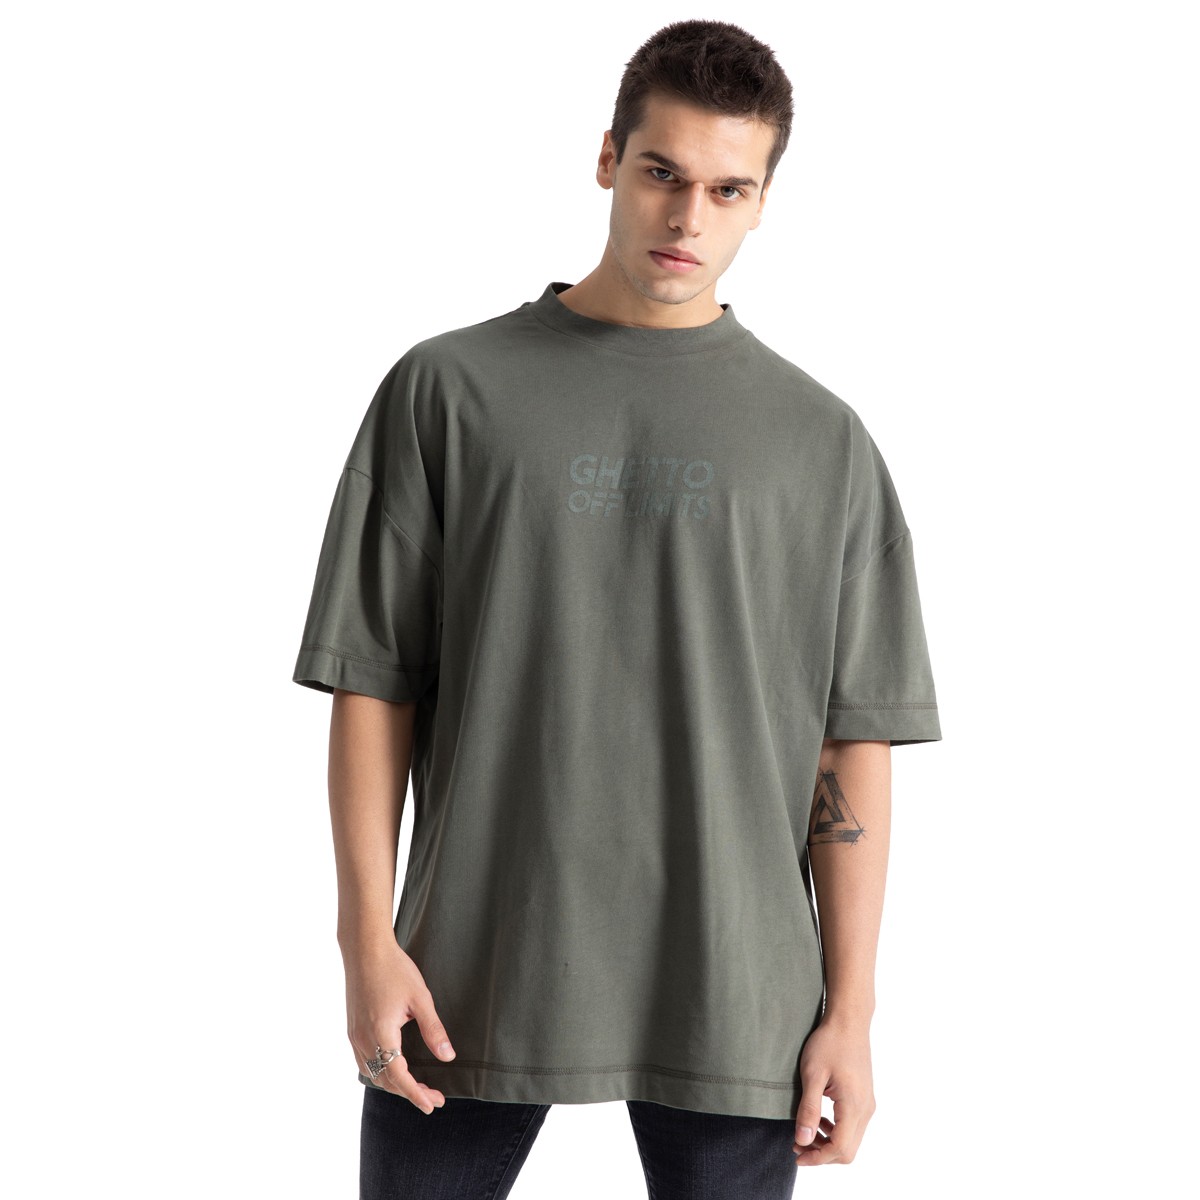 Ghetto Off Limits The Roots Grape Leaf Oversize T-Shirt TS-10001